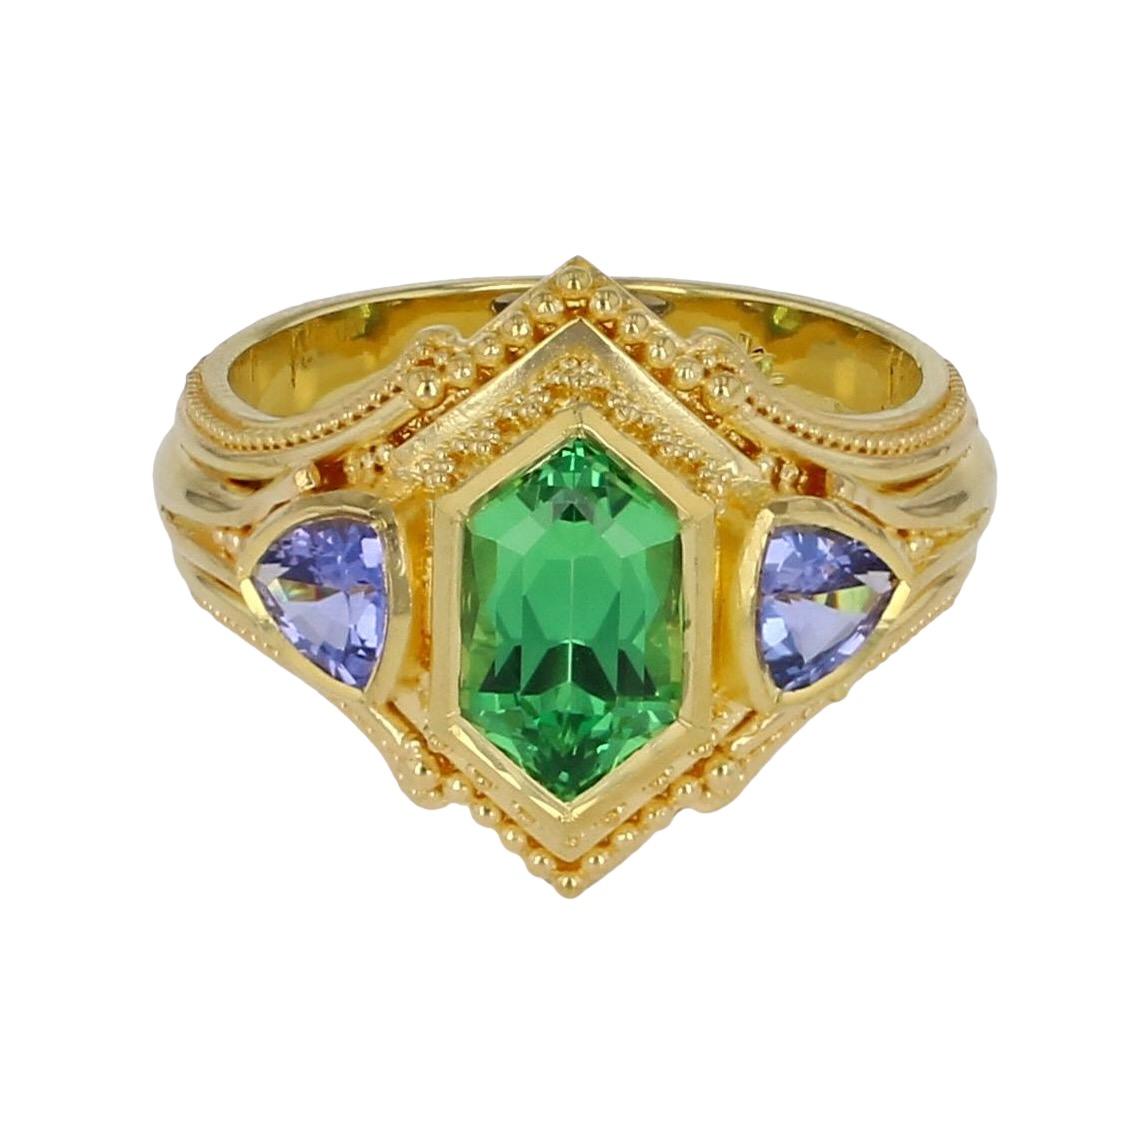 From the Kent Raible one of a kind Masterworks collection we bring you 'Dreams of Africa'. This ring features a stunning, top quality, emerald green natural Tsavorite Garnet, from Tsavo National Park in Kenya. The stone has a very unique shape,